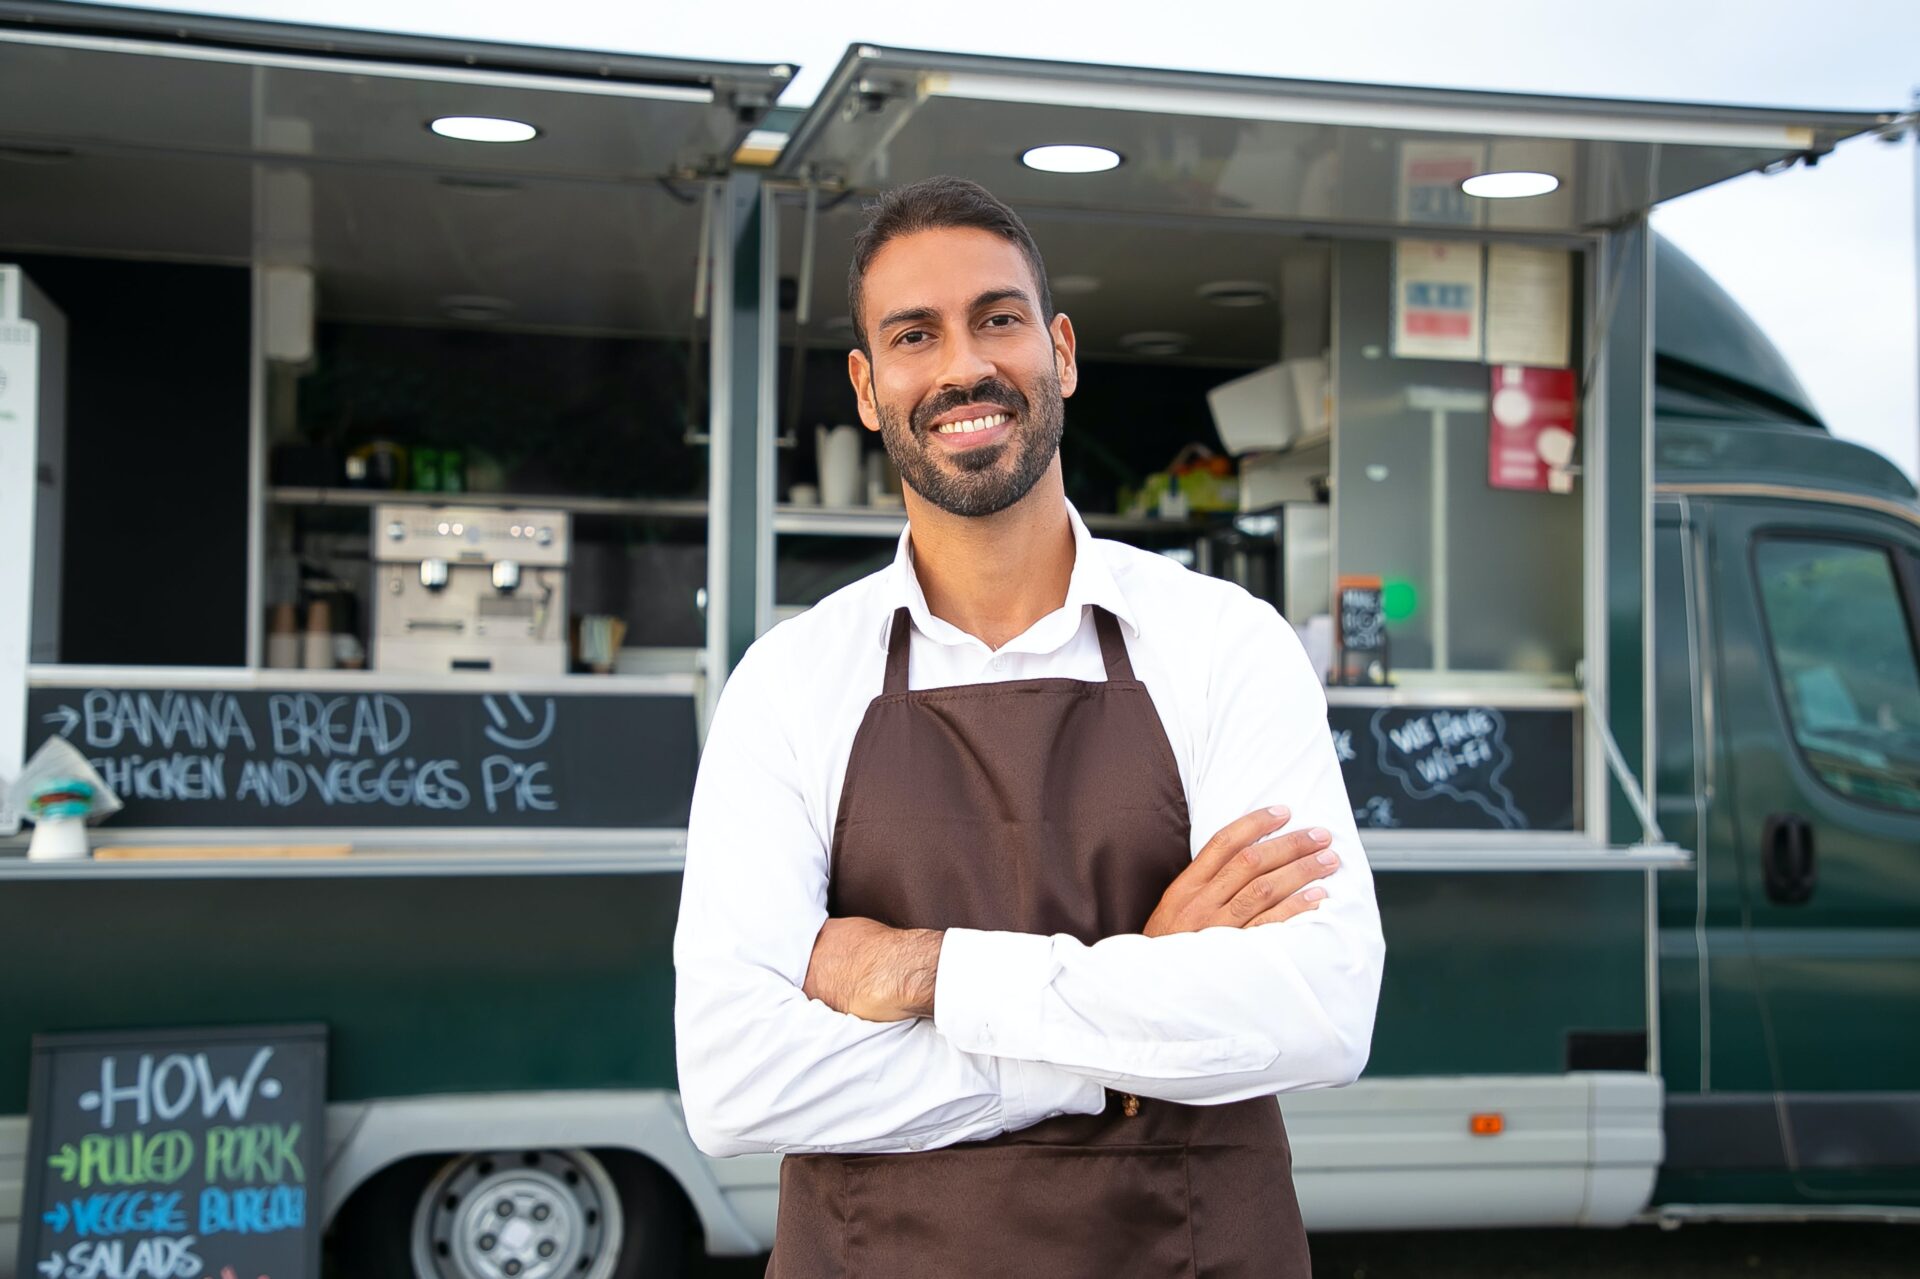 A man wearing an apron smiling in front of his small business food truck, posing with his arms crossed.